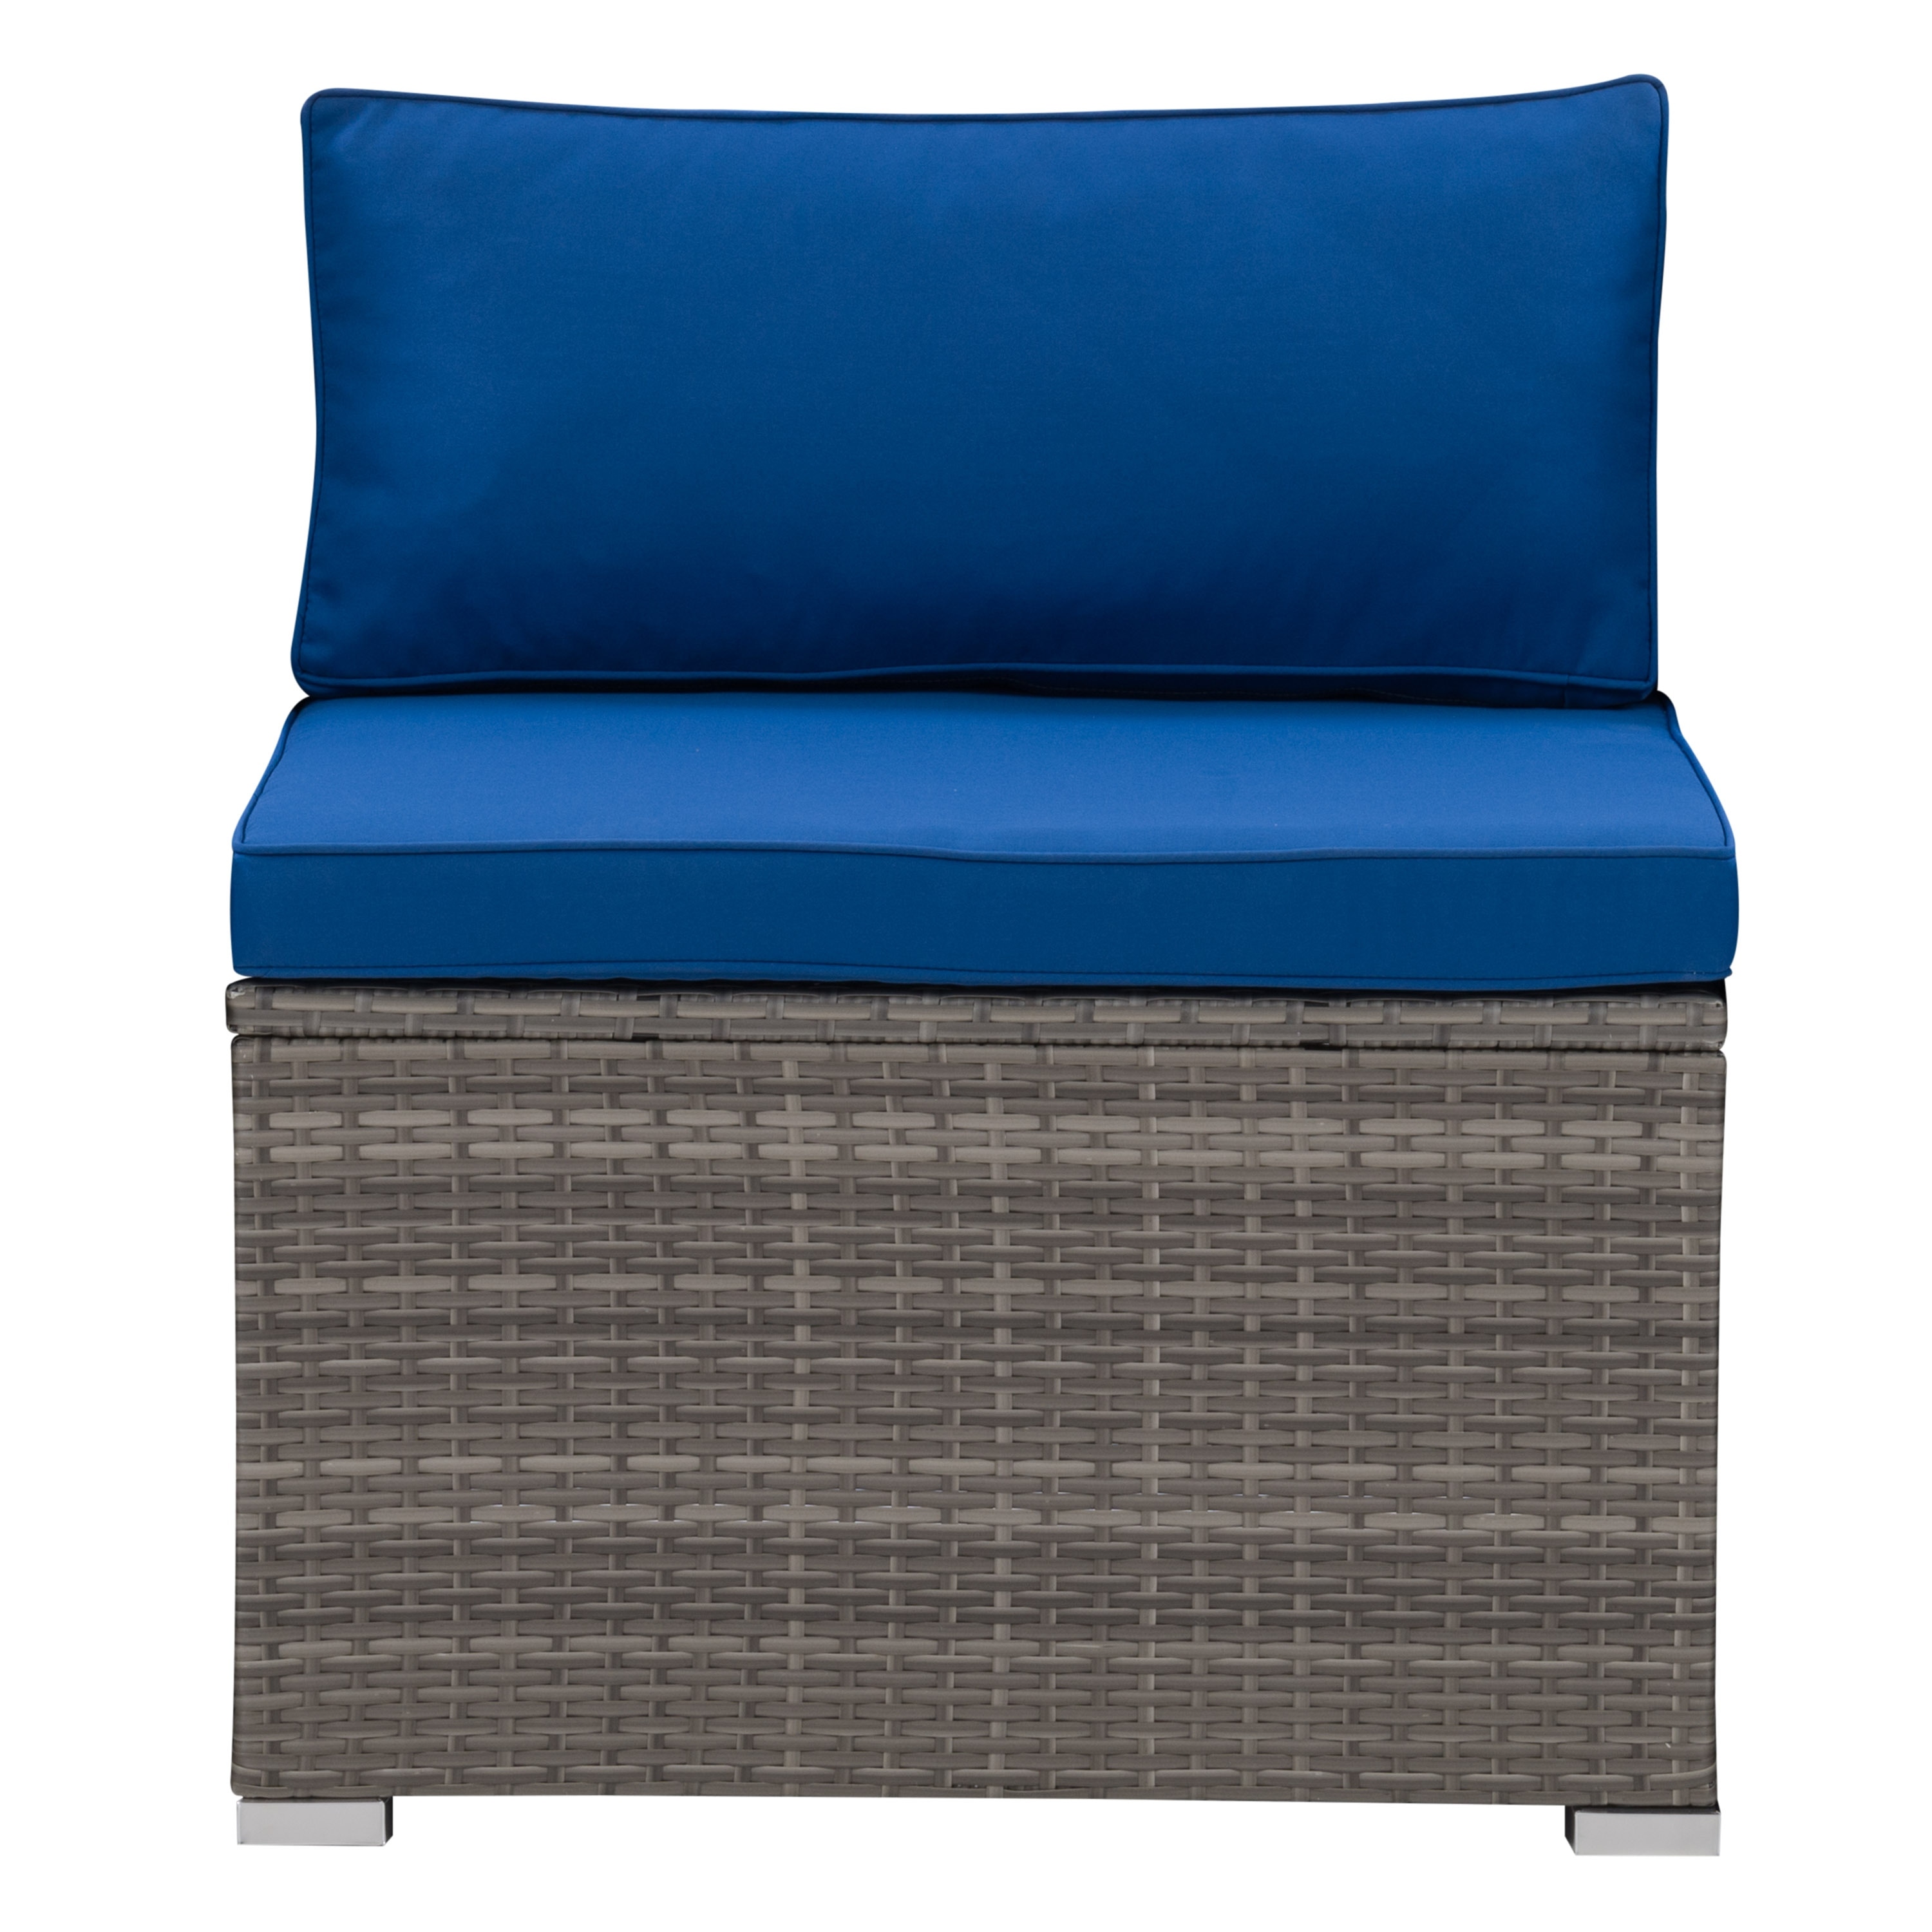 Corliving Parksville Patio Sectional Middle Chair. Grey/blue